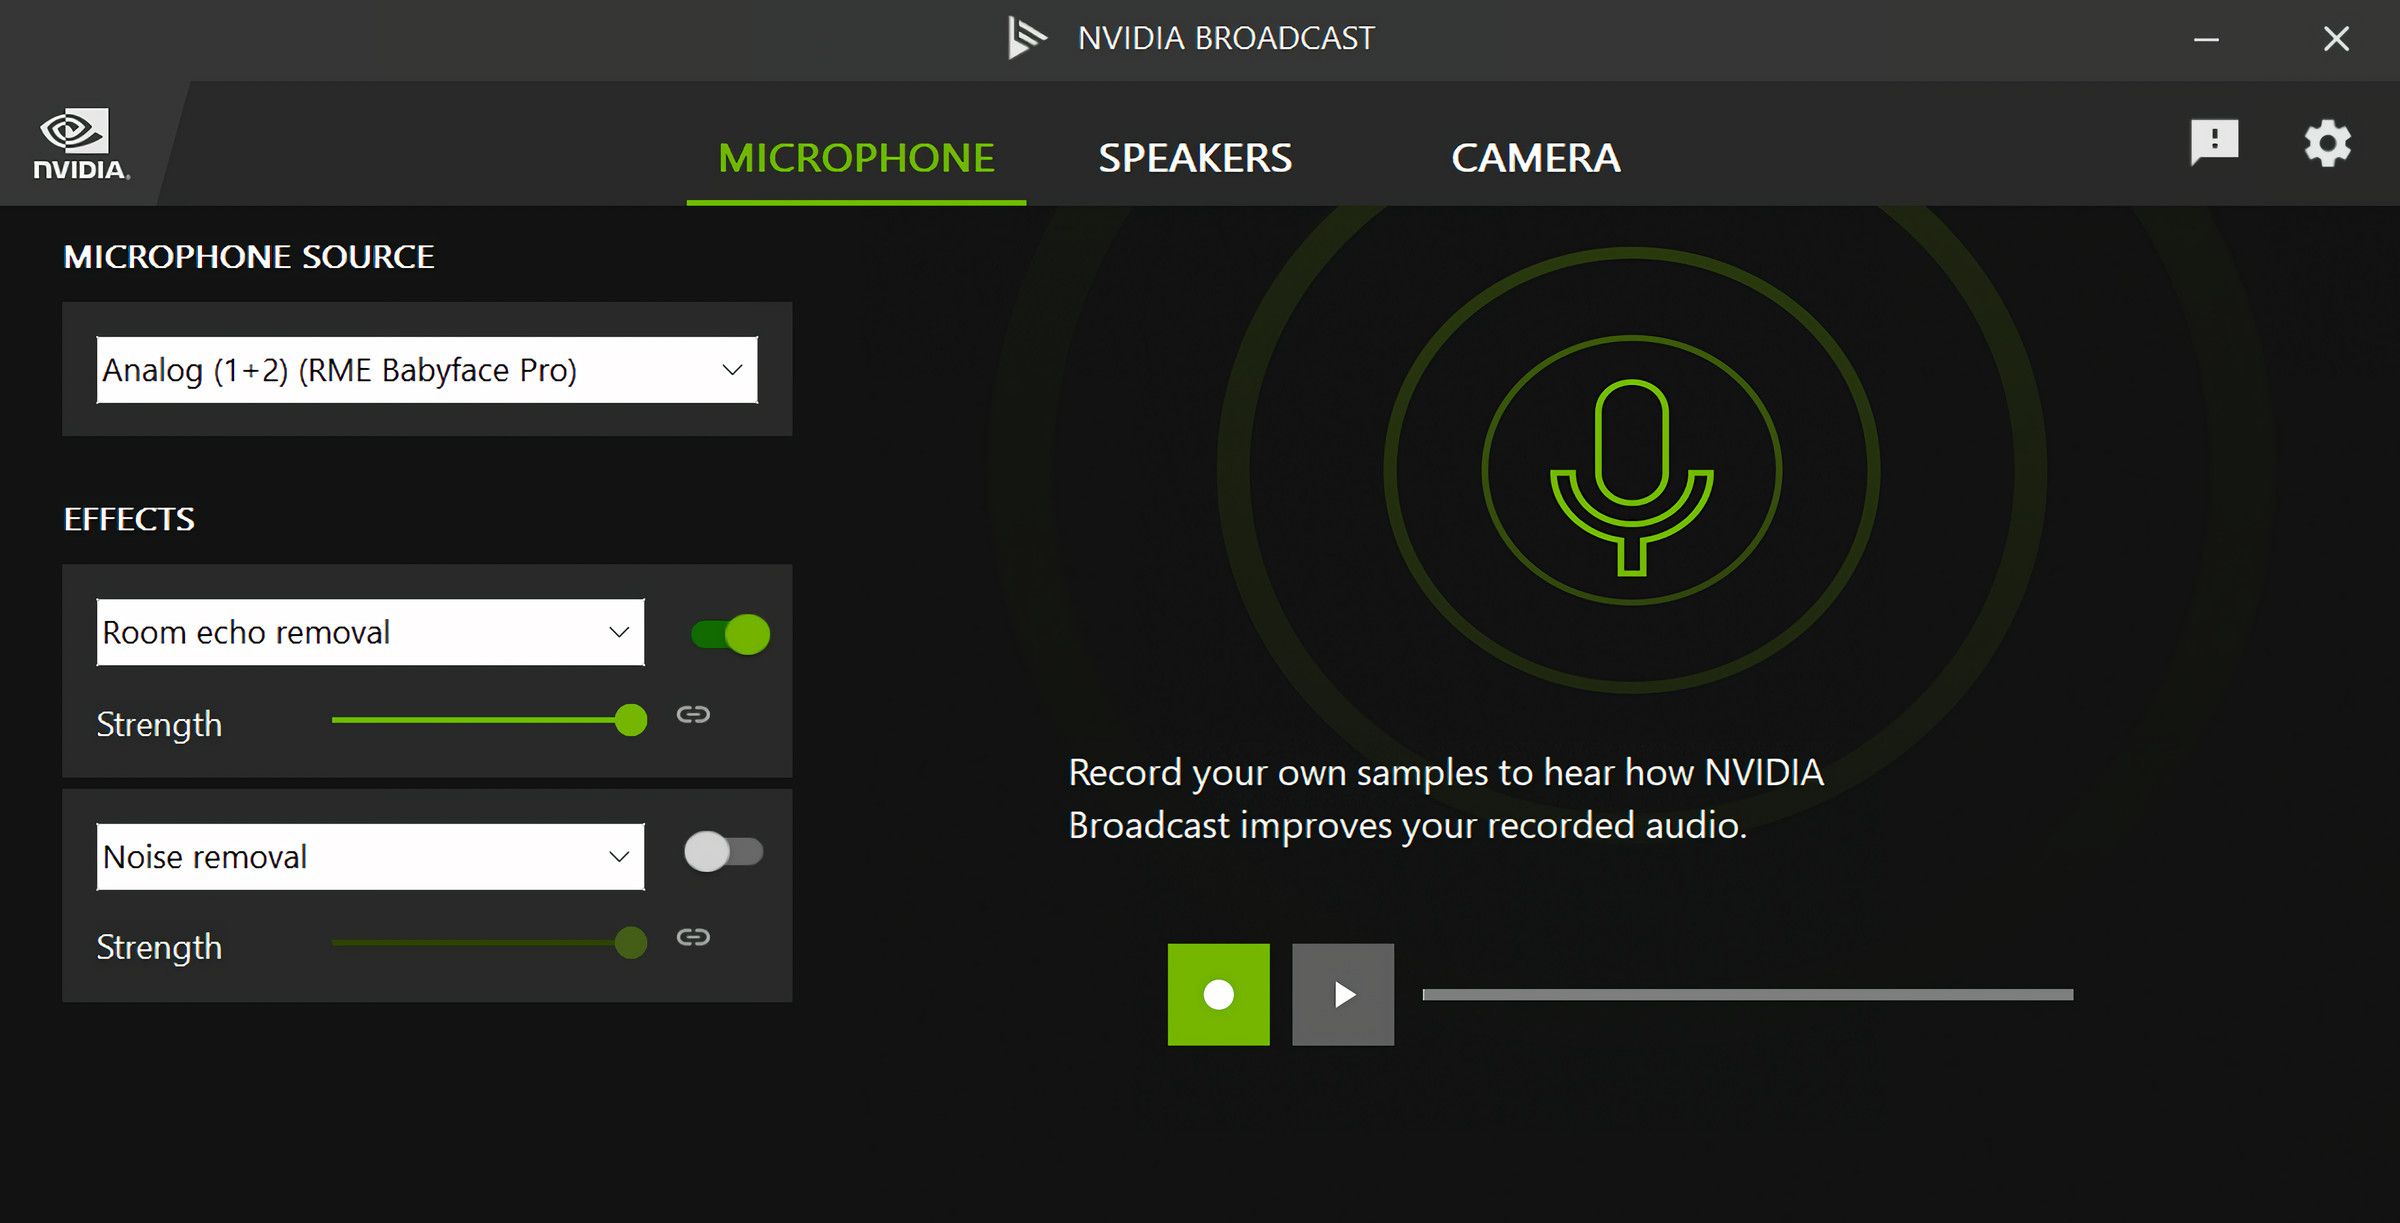 A screenshot of the interface for Nvidia Broadcast.